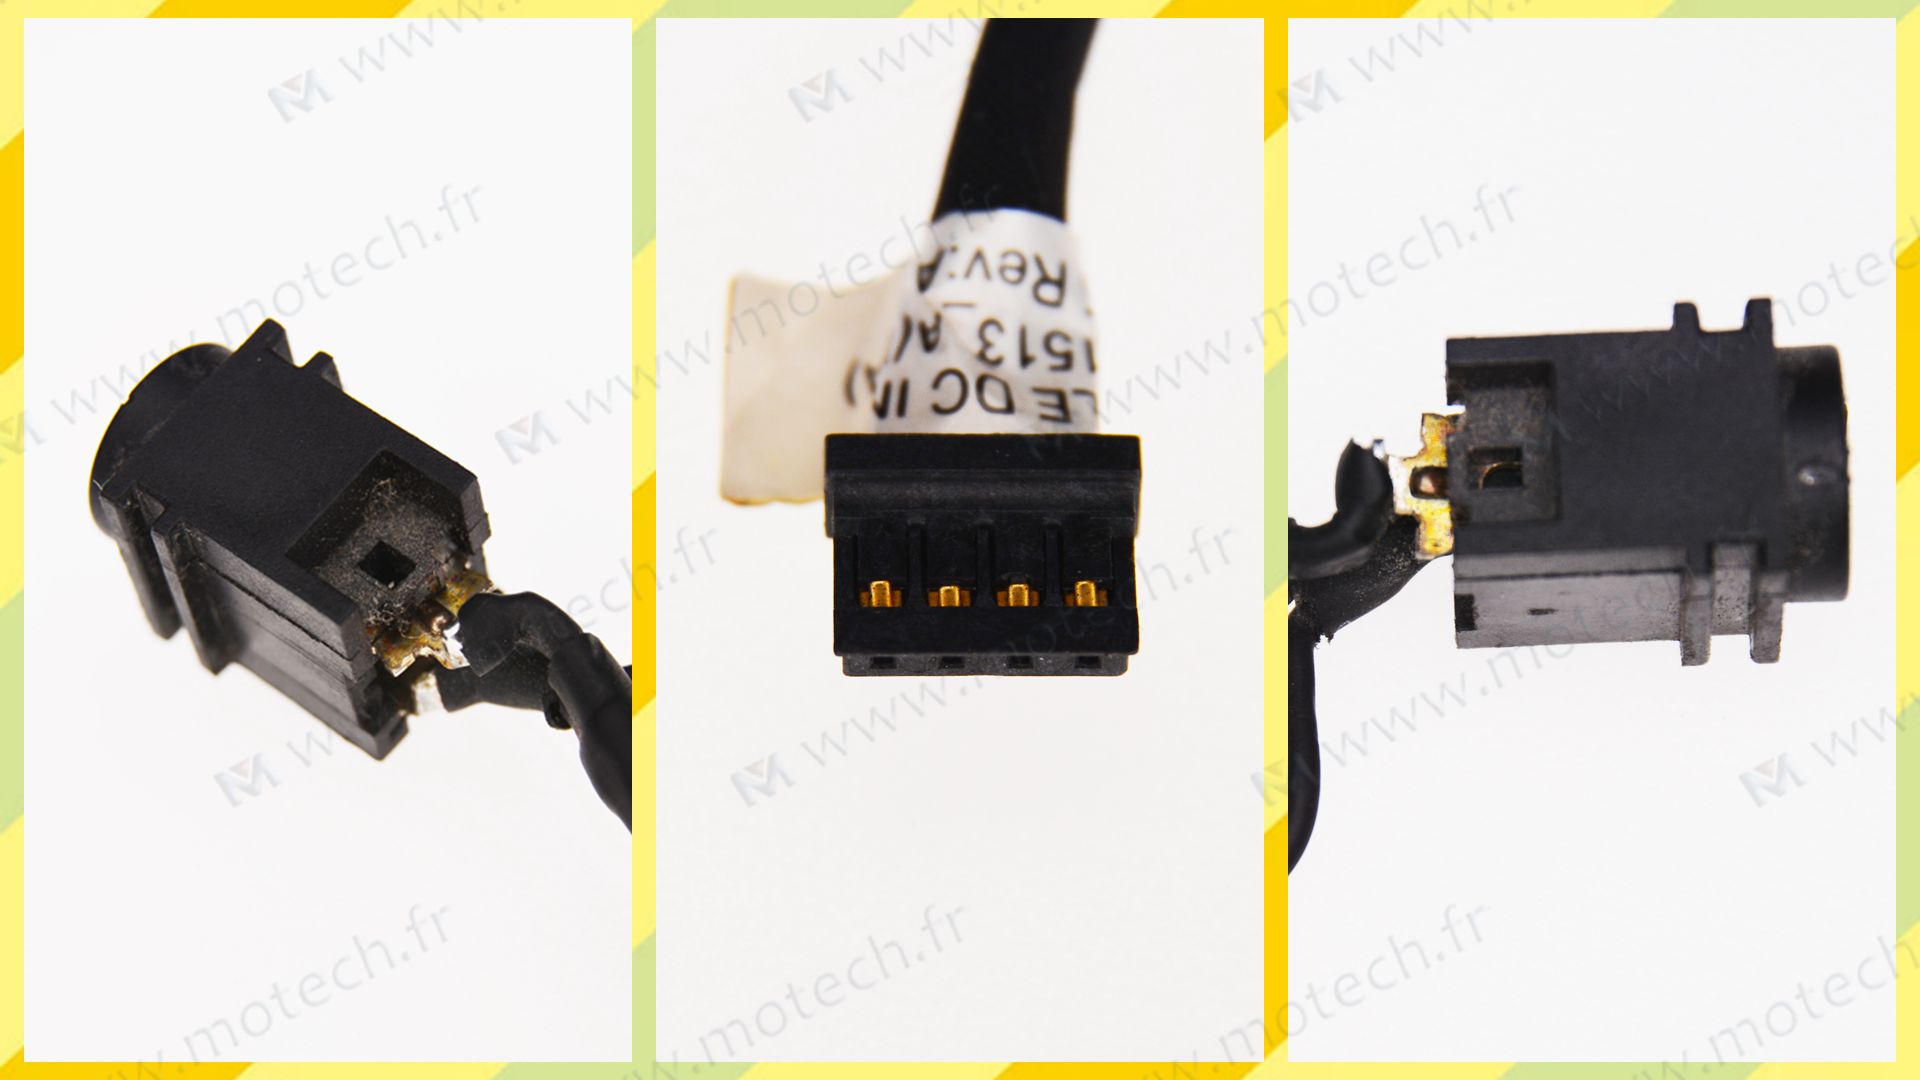 SONY VPCEB1M1E charging connector, SONY VPCEB1M1E DC Power Jack, SONY VPCEB1M1E DC IN Cable, SONY VPCEB1M1E Power Jack, SONY VPCEB1M1E plug, SONY VPCEB1M1E Jack socket, SONY VPCEB1M1E connecteur de charge, 